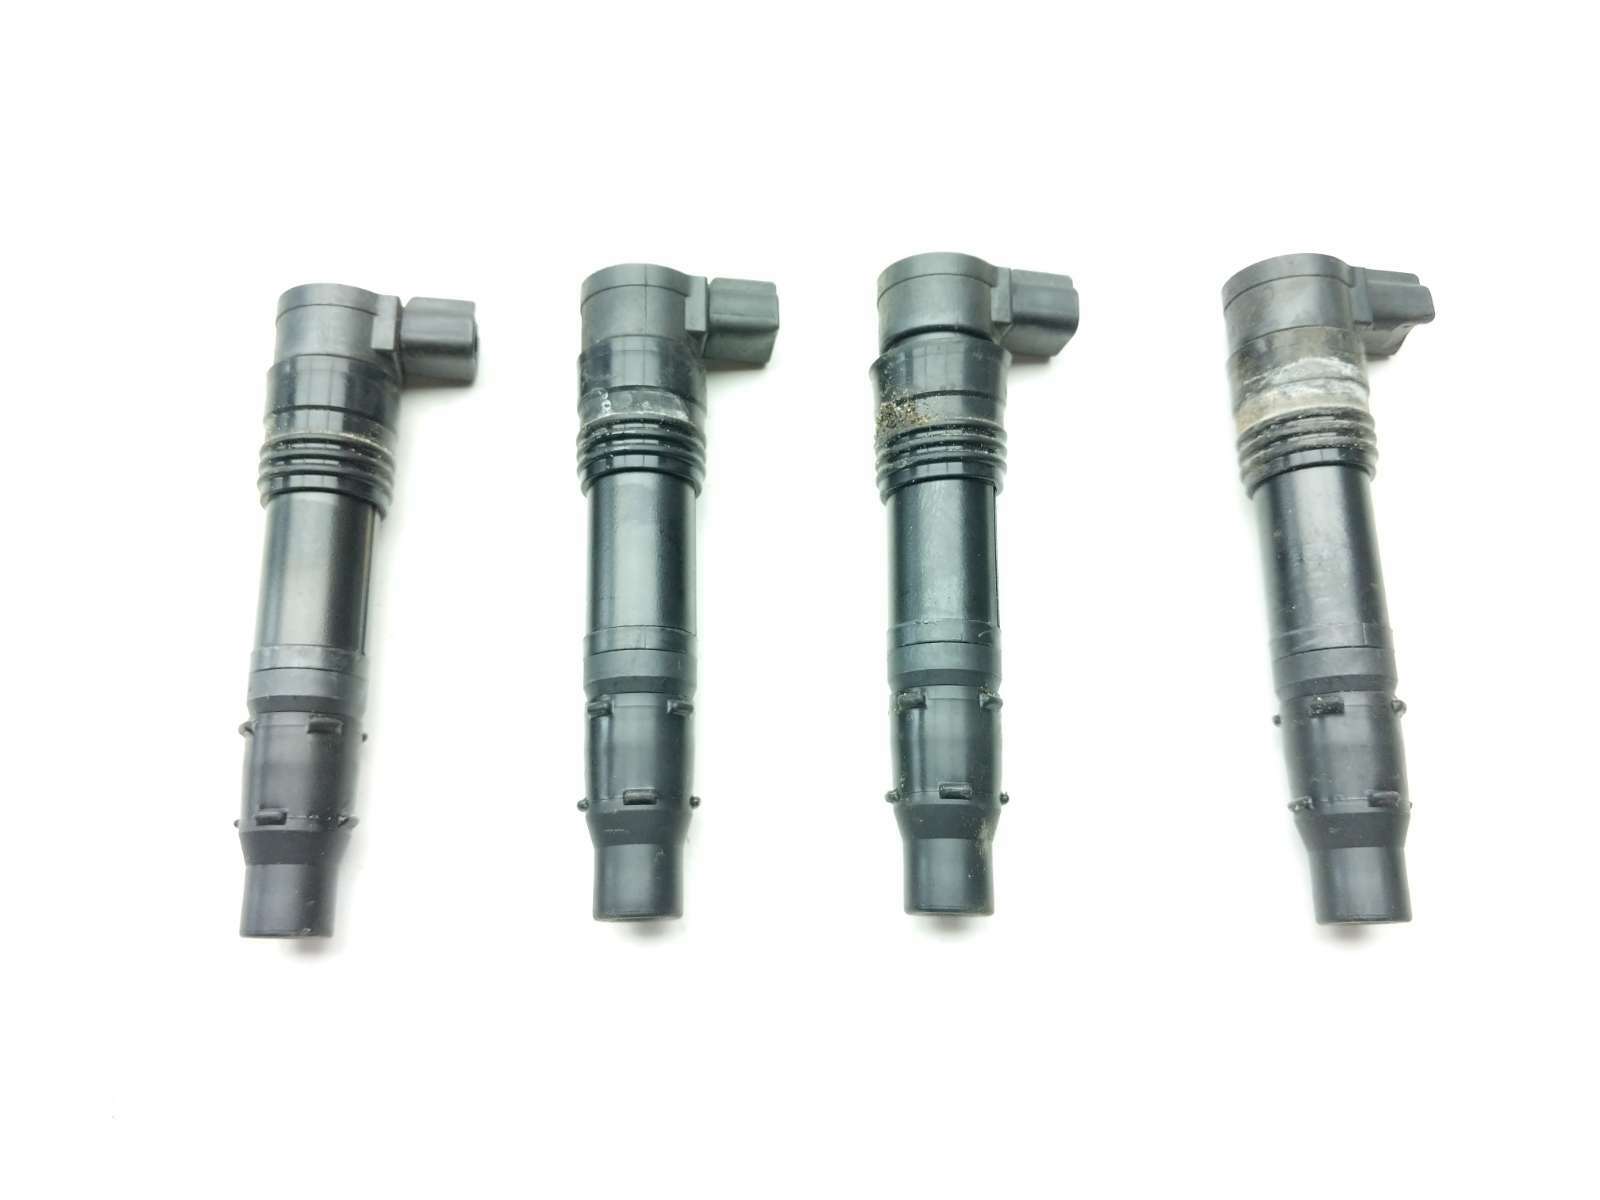 08 09 Kawasaki Concours ZG1400 Ignition Coil Plug Pack